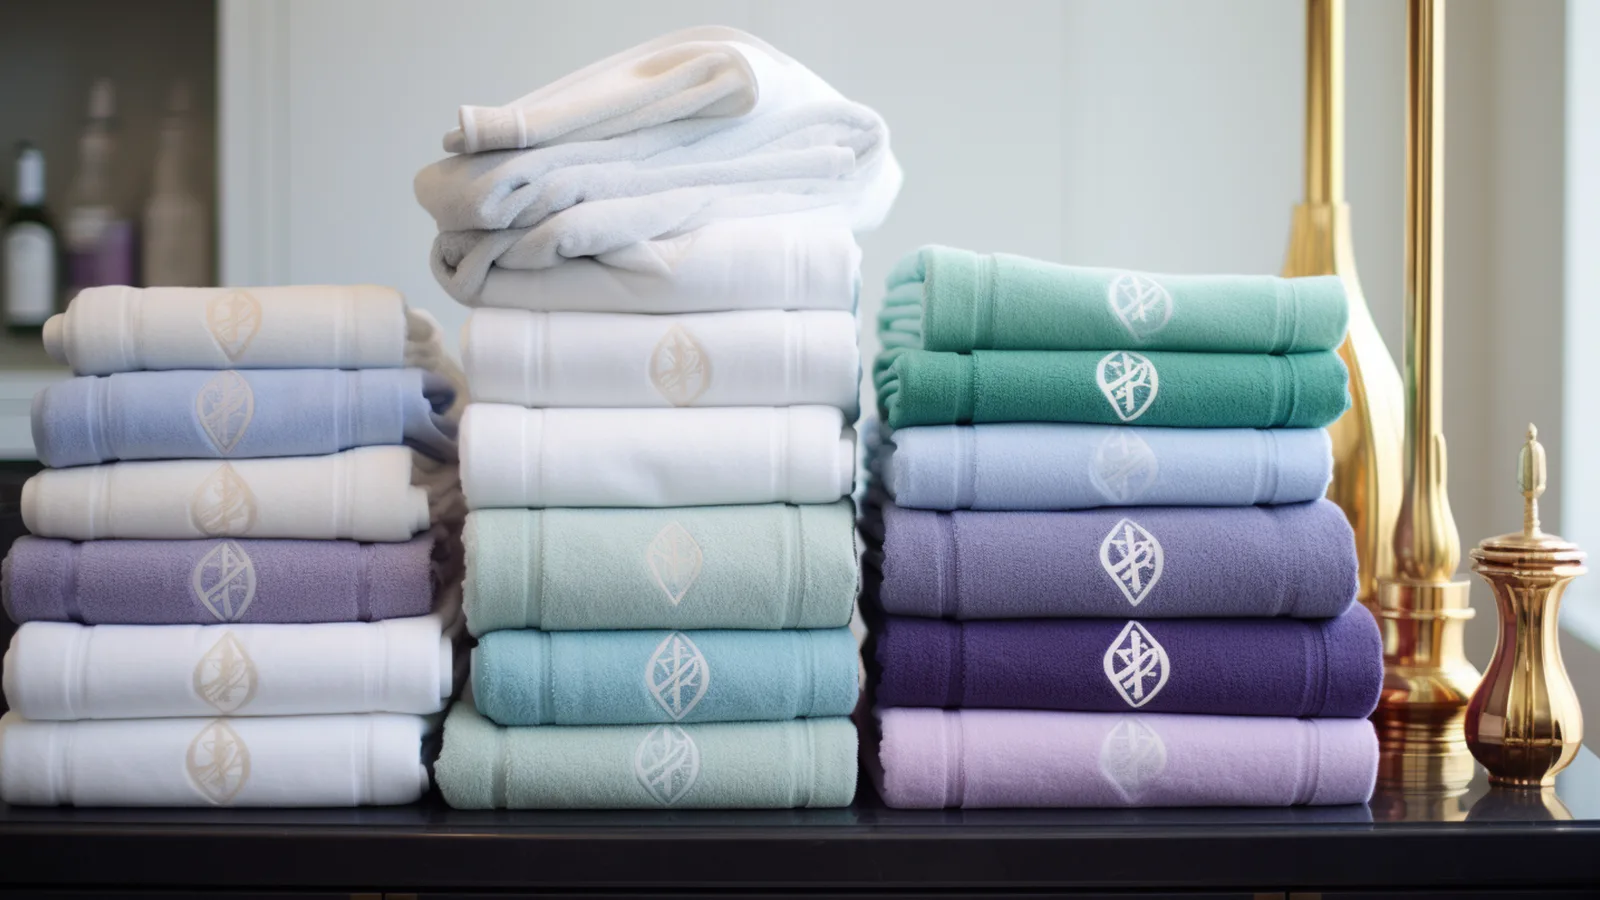 A stack of towels, stacked on top of a table, which can be used as a stylish way to decorate an apartment bathroom.